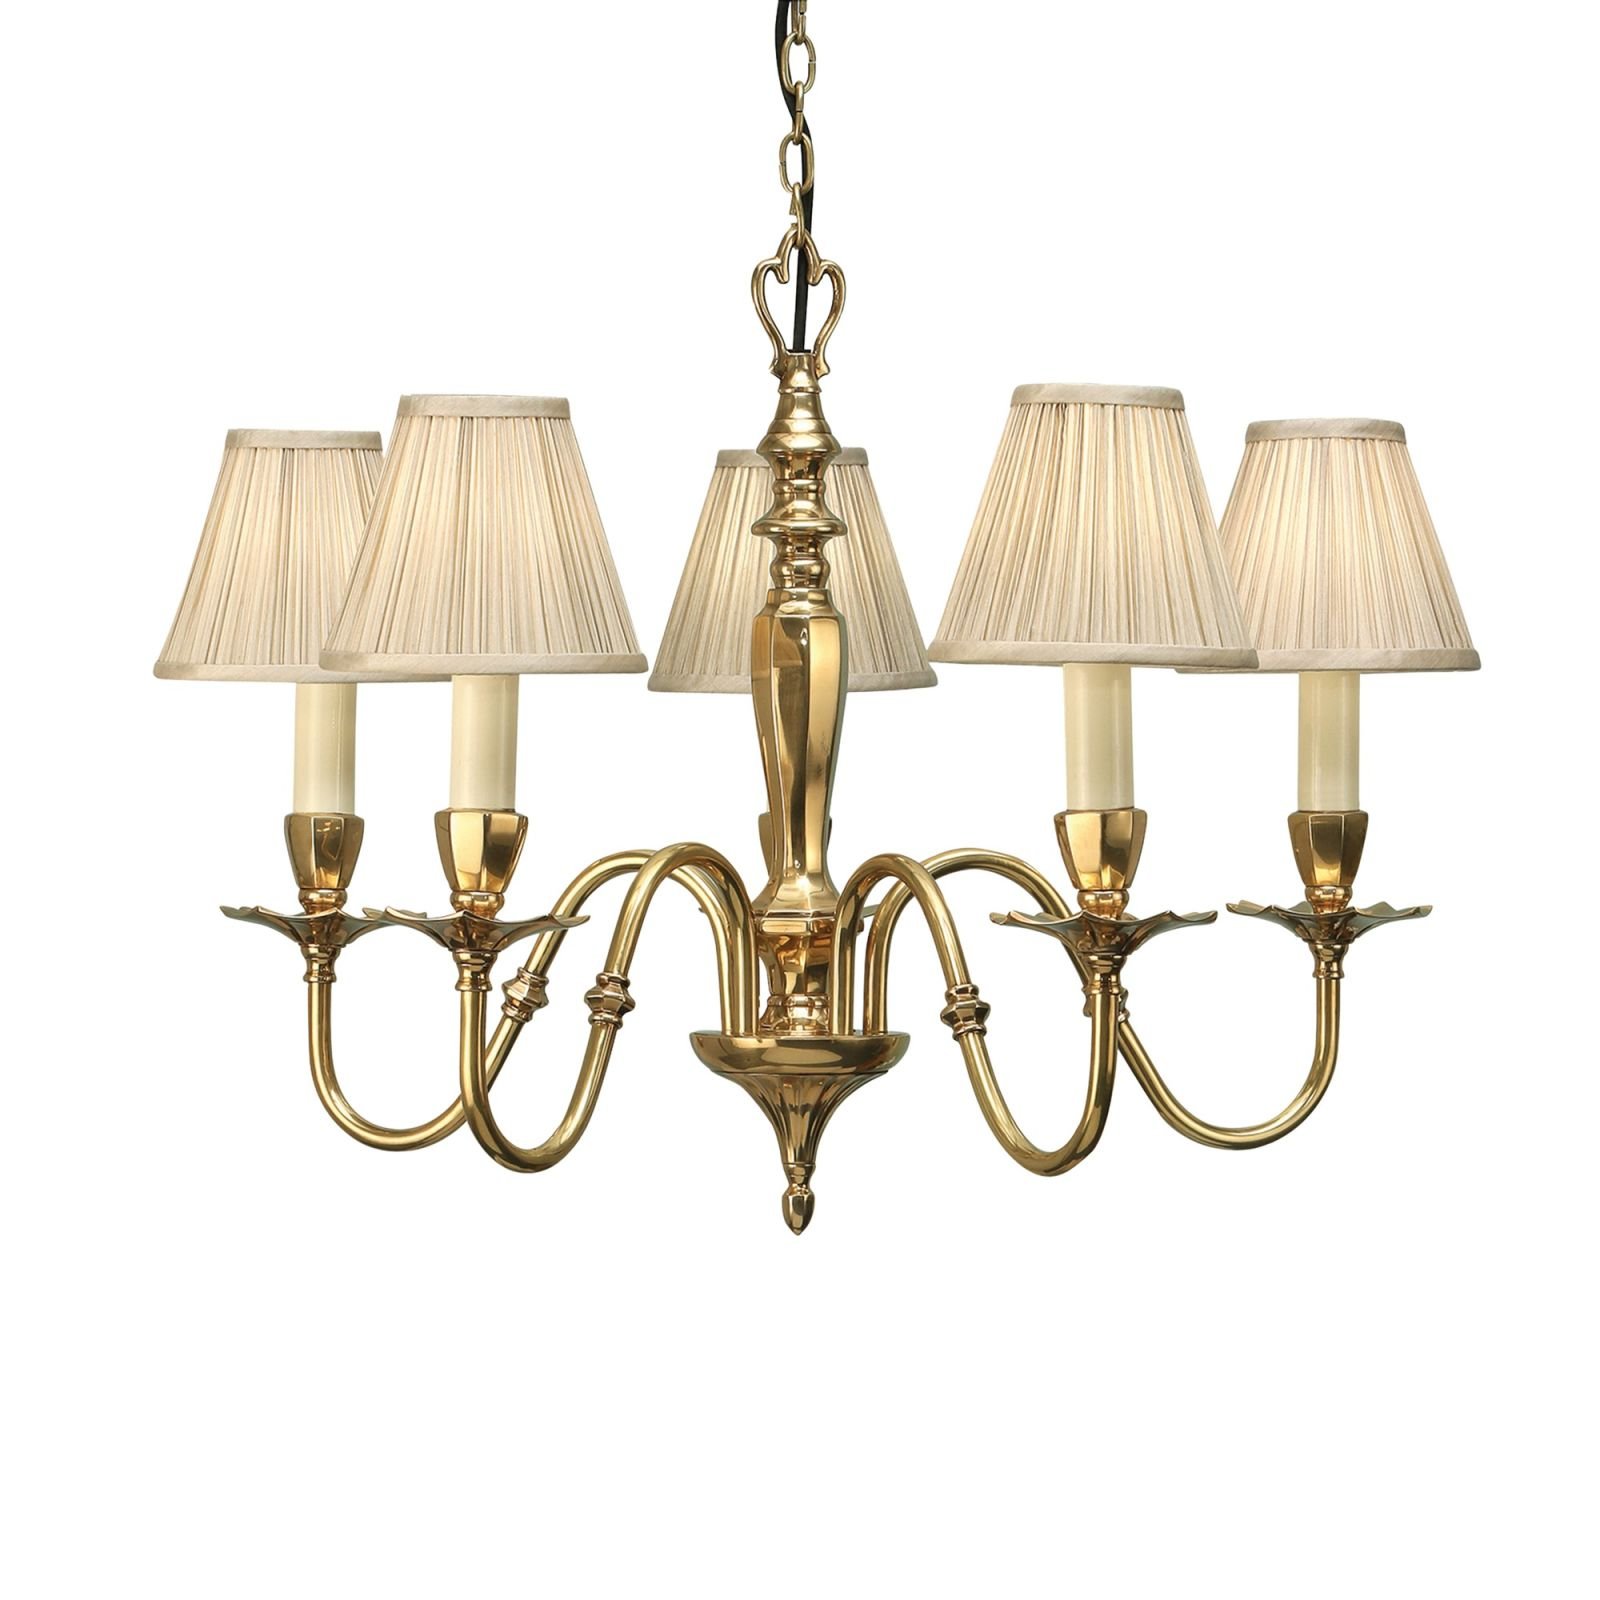 Asquith five light pendant with or without beige shades